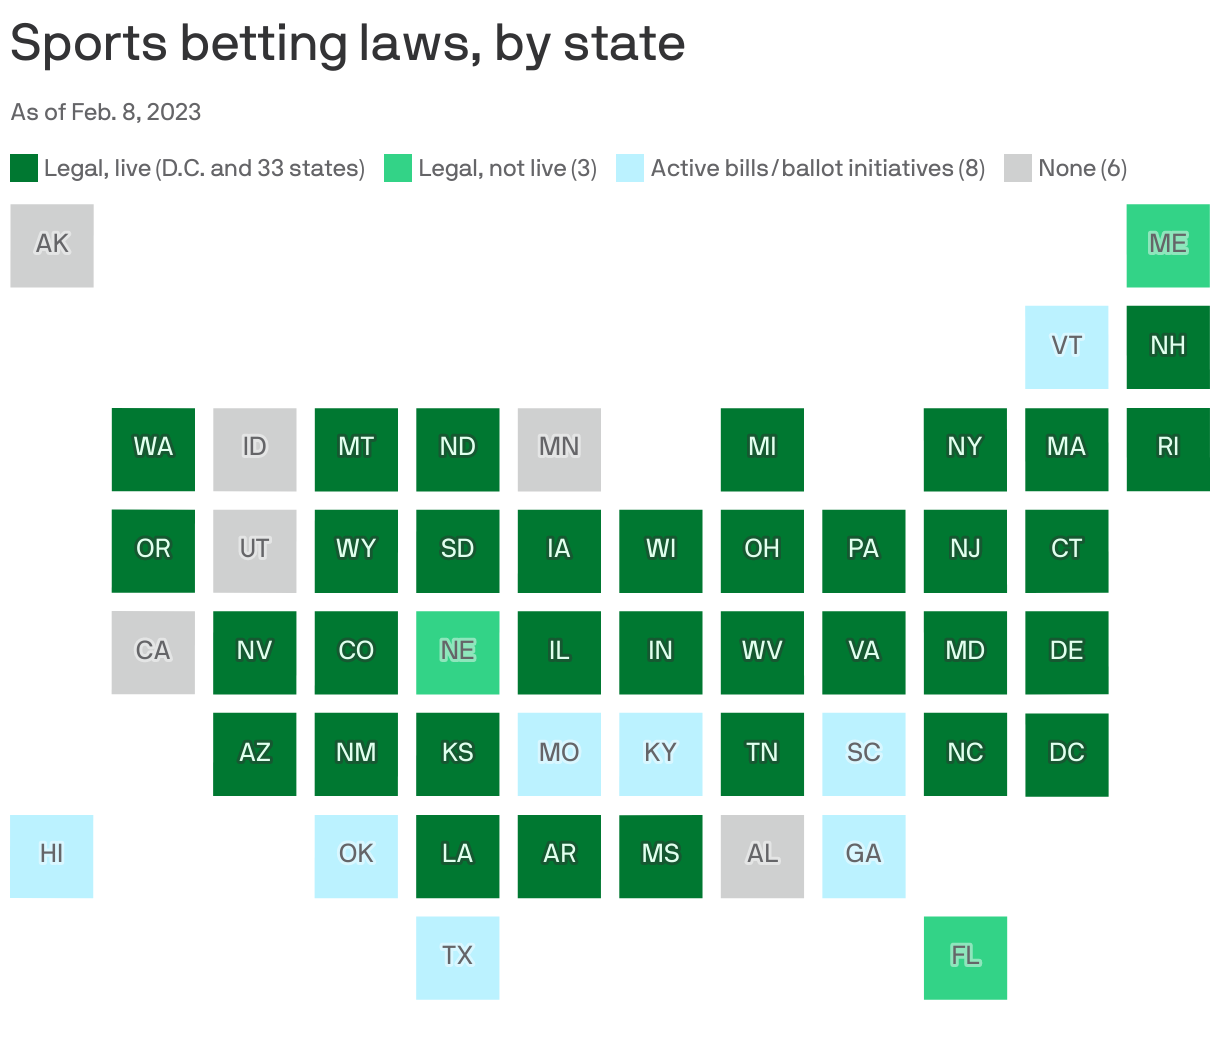 Sports betting laws, by state